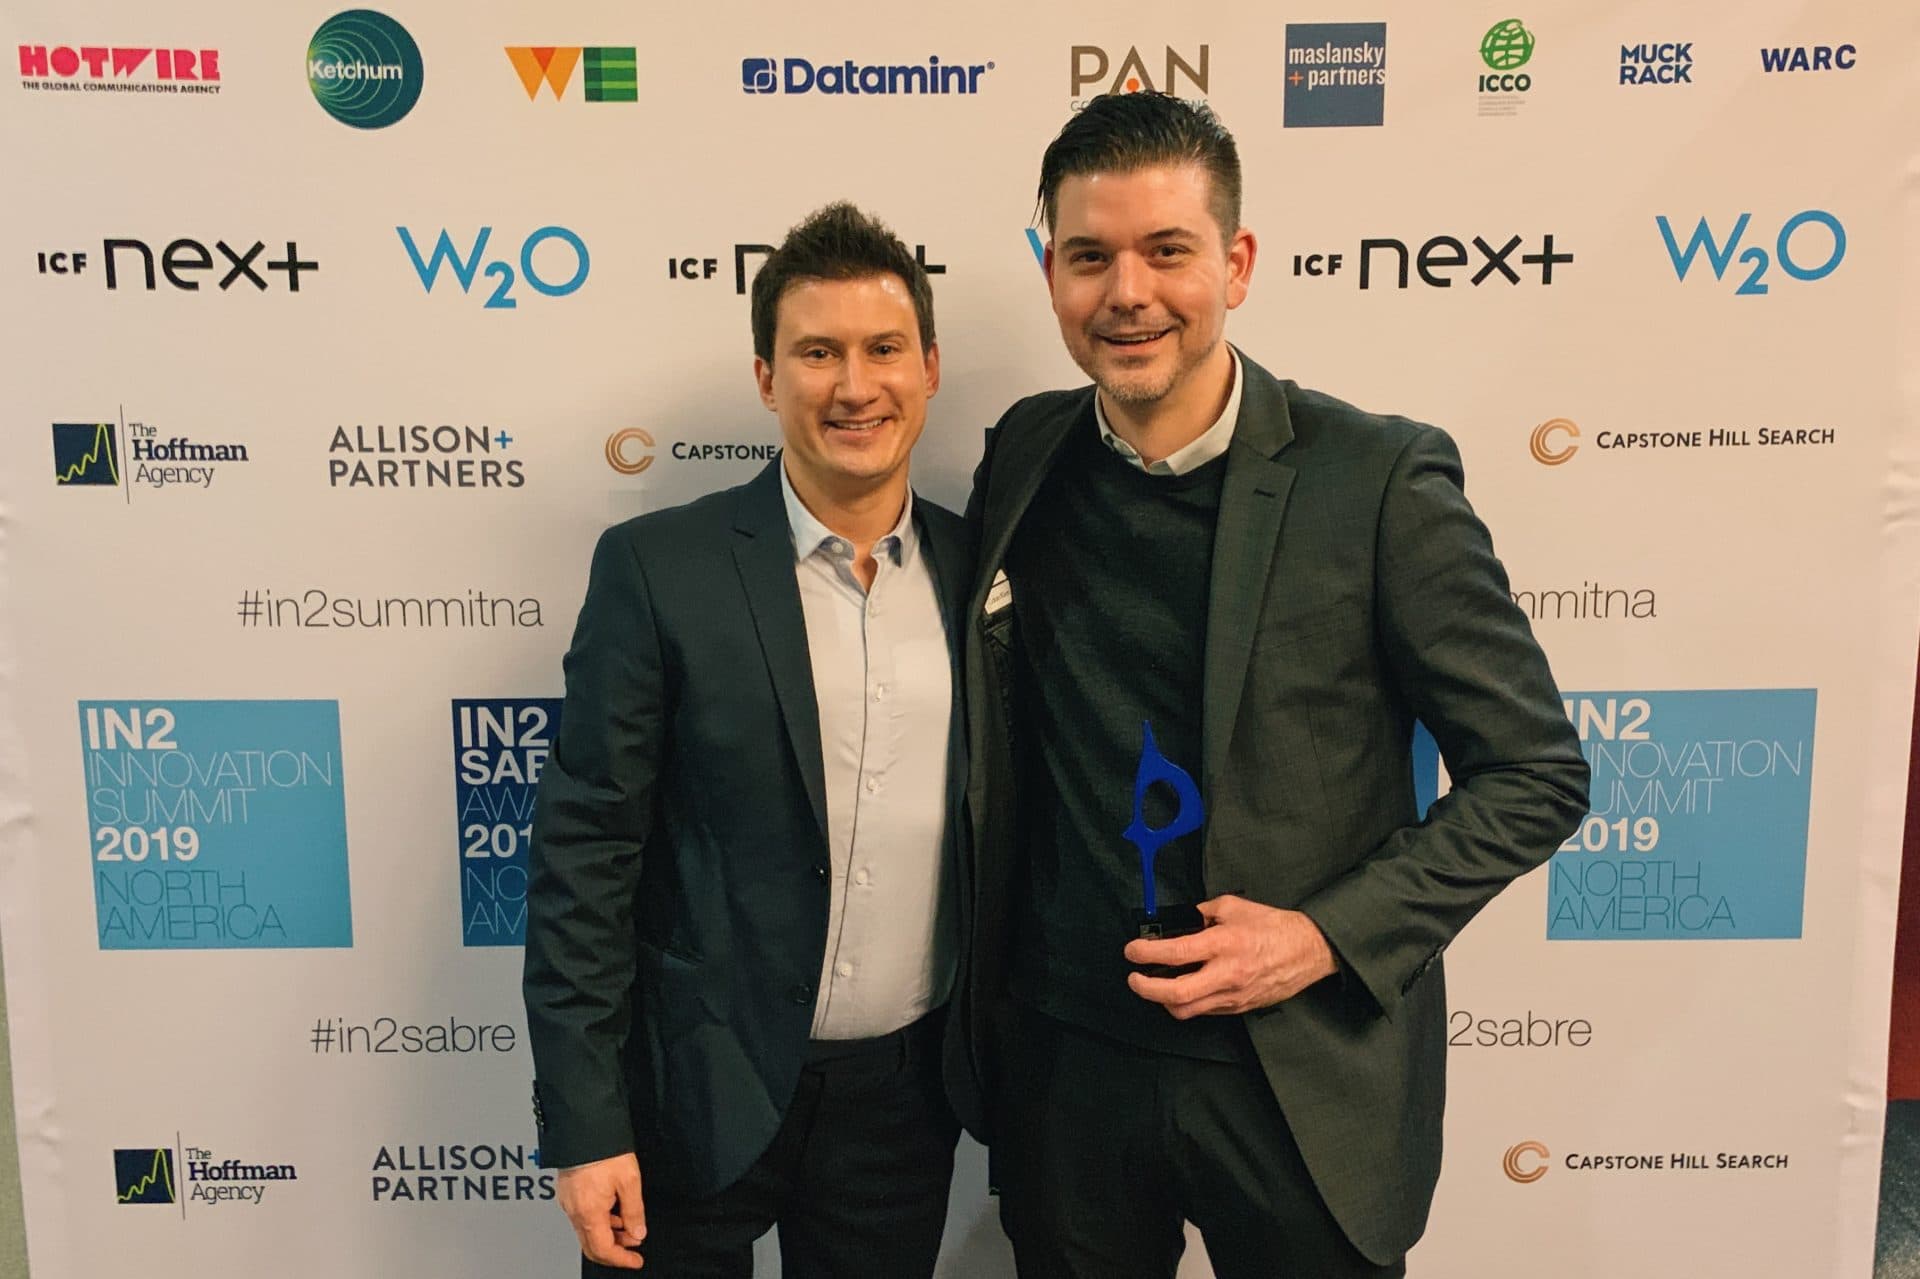 Weber Shandwick Wins In2 SABRE Award for ‘Q’ AI Tool at The Holmes Report’s 2019 Ceremony